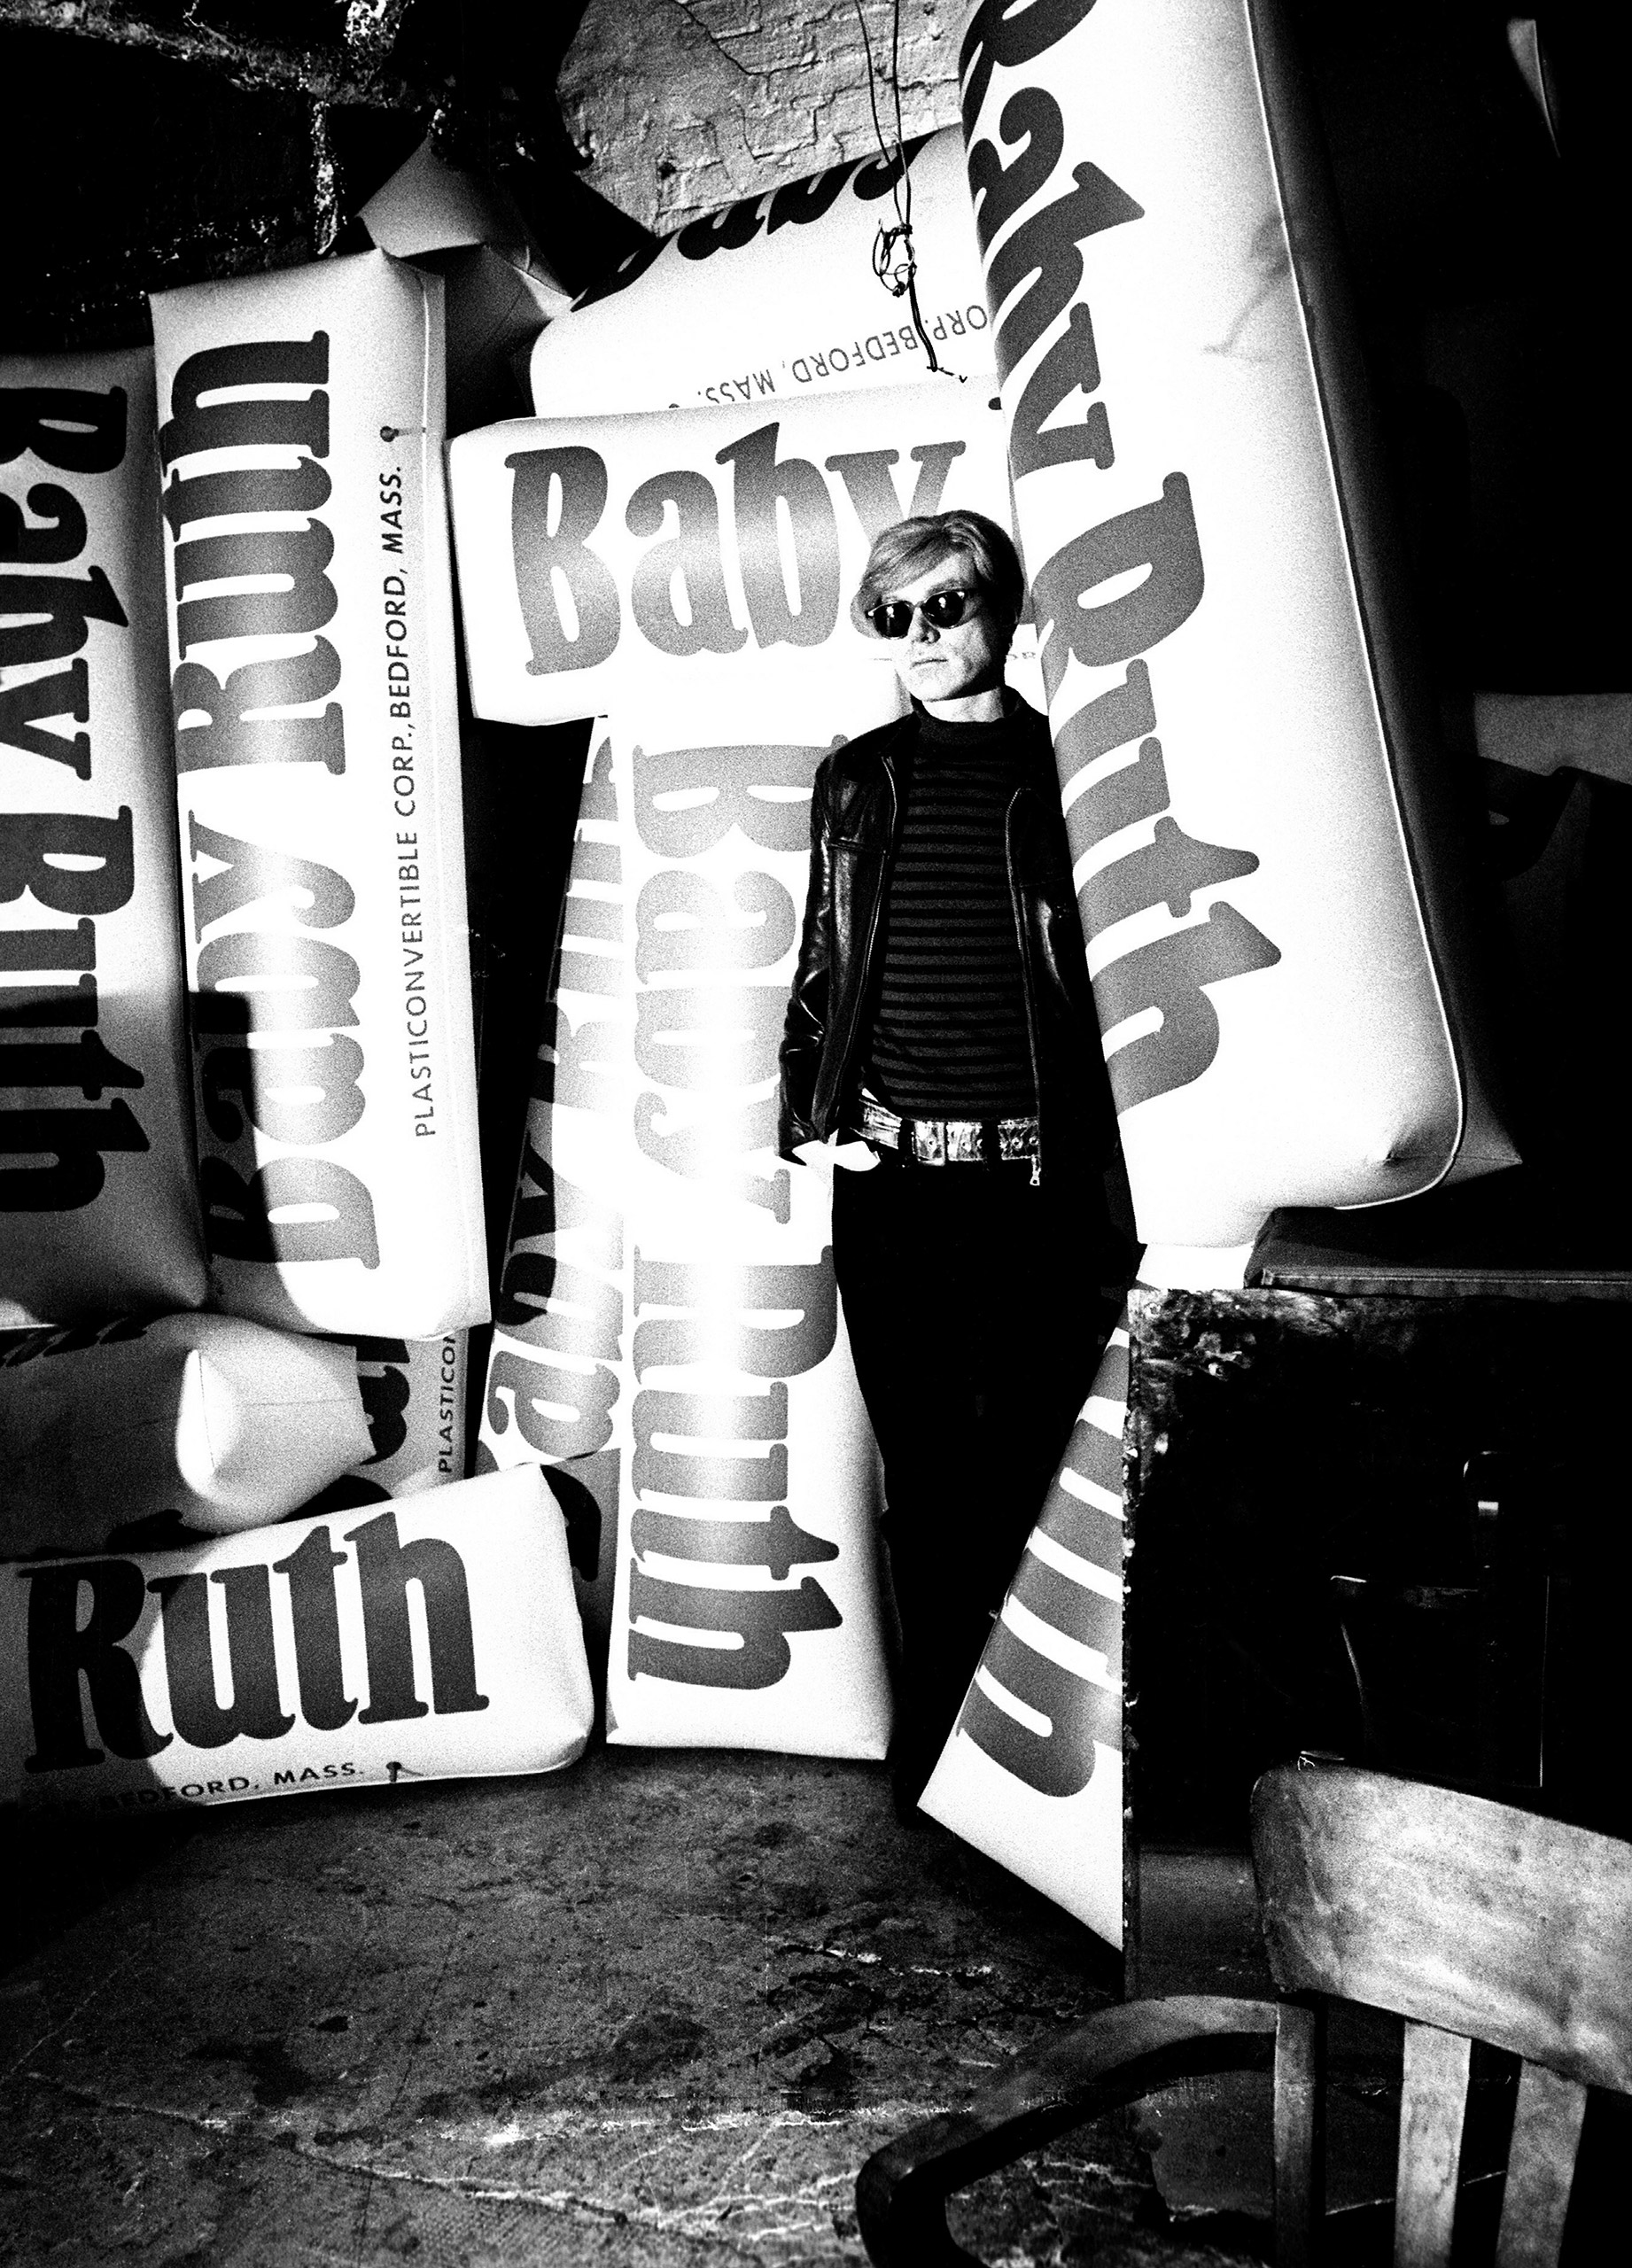 Andy Warhol standing with blow up Baby Ruth bars at the Factory in New York, 1967.